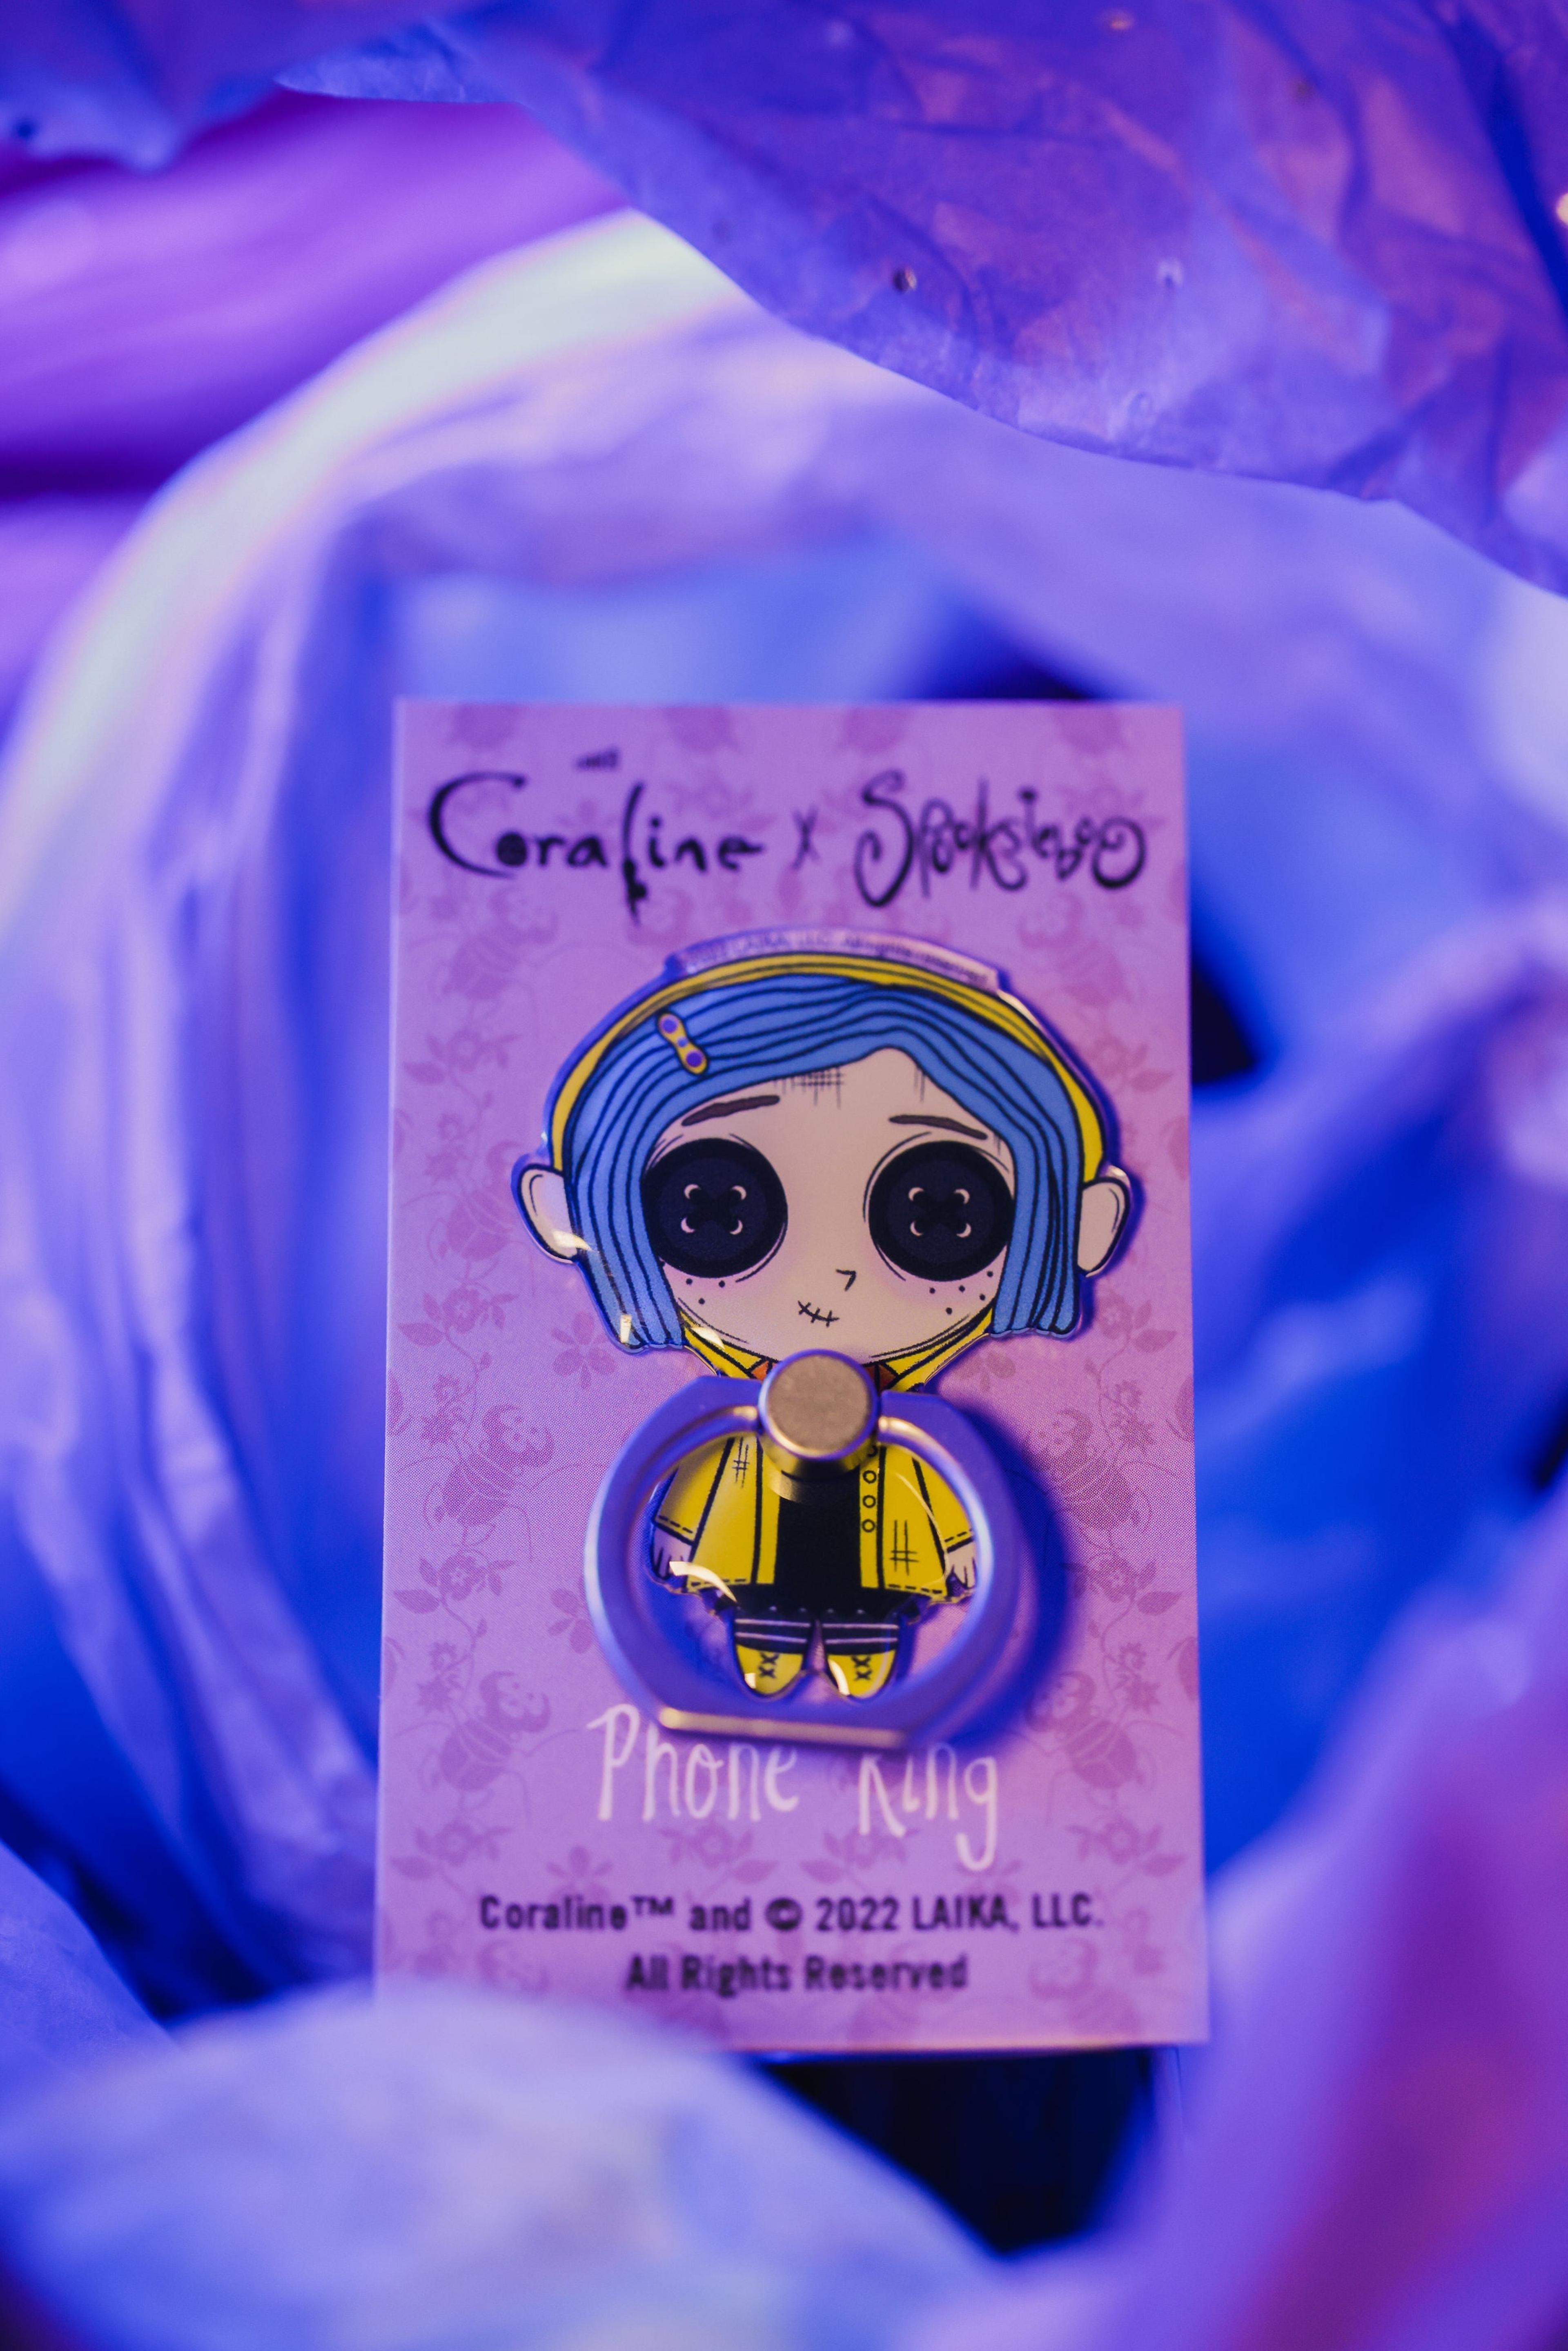 Coraline Doll - Phone Ring